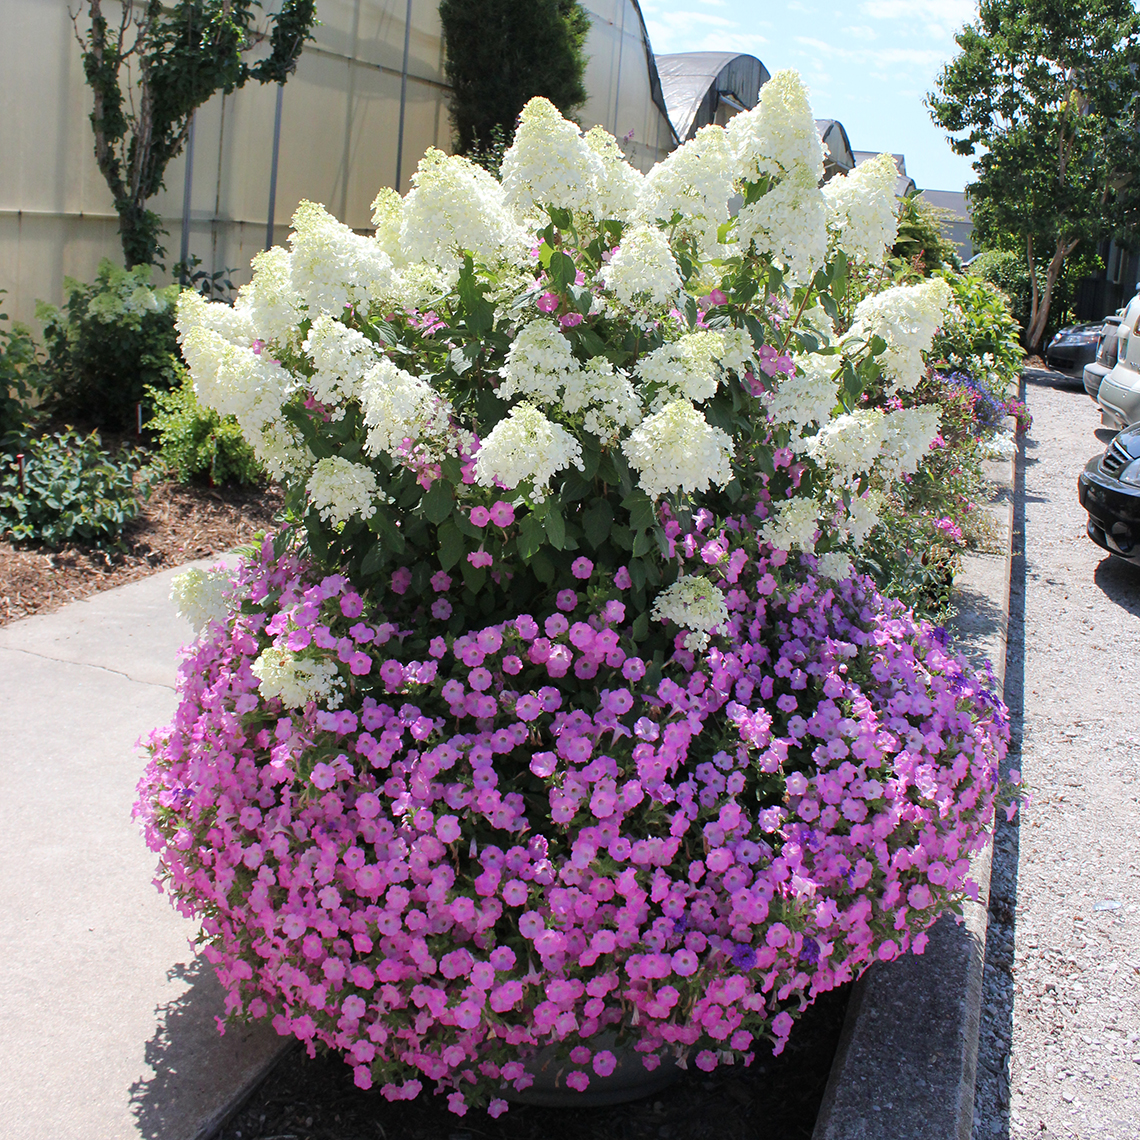 Bobo panicle hydrangea blooming in a large container surrounded by bright pink petunias